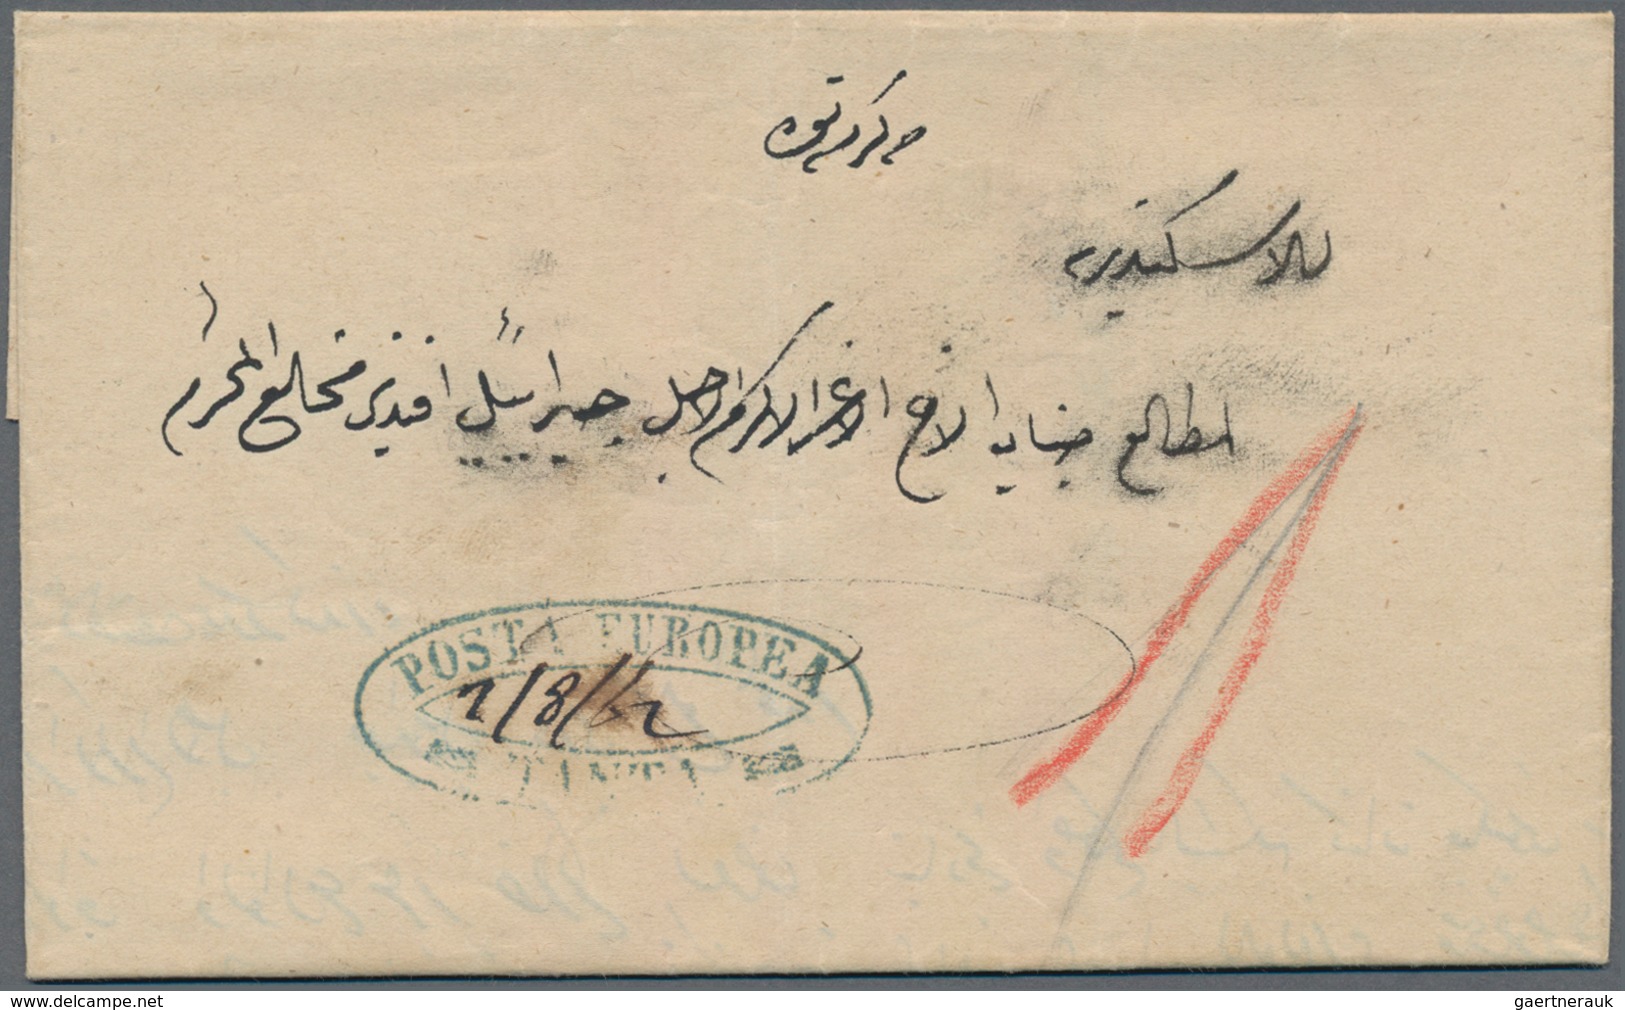 Ägypten - Vorphilatelie: 1853-65 "POSTA EUROPEA": Specialized Collection Of 18 Stampless Covers And - Vorphilatelie